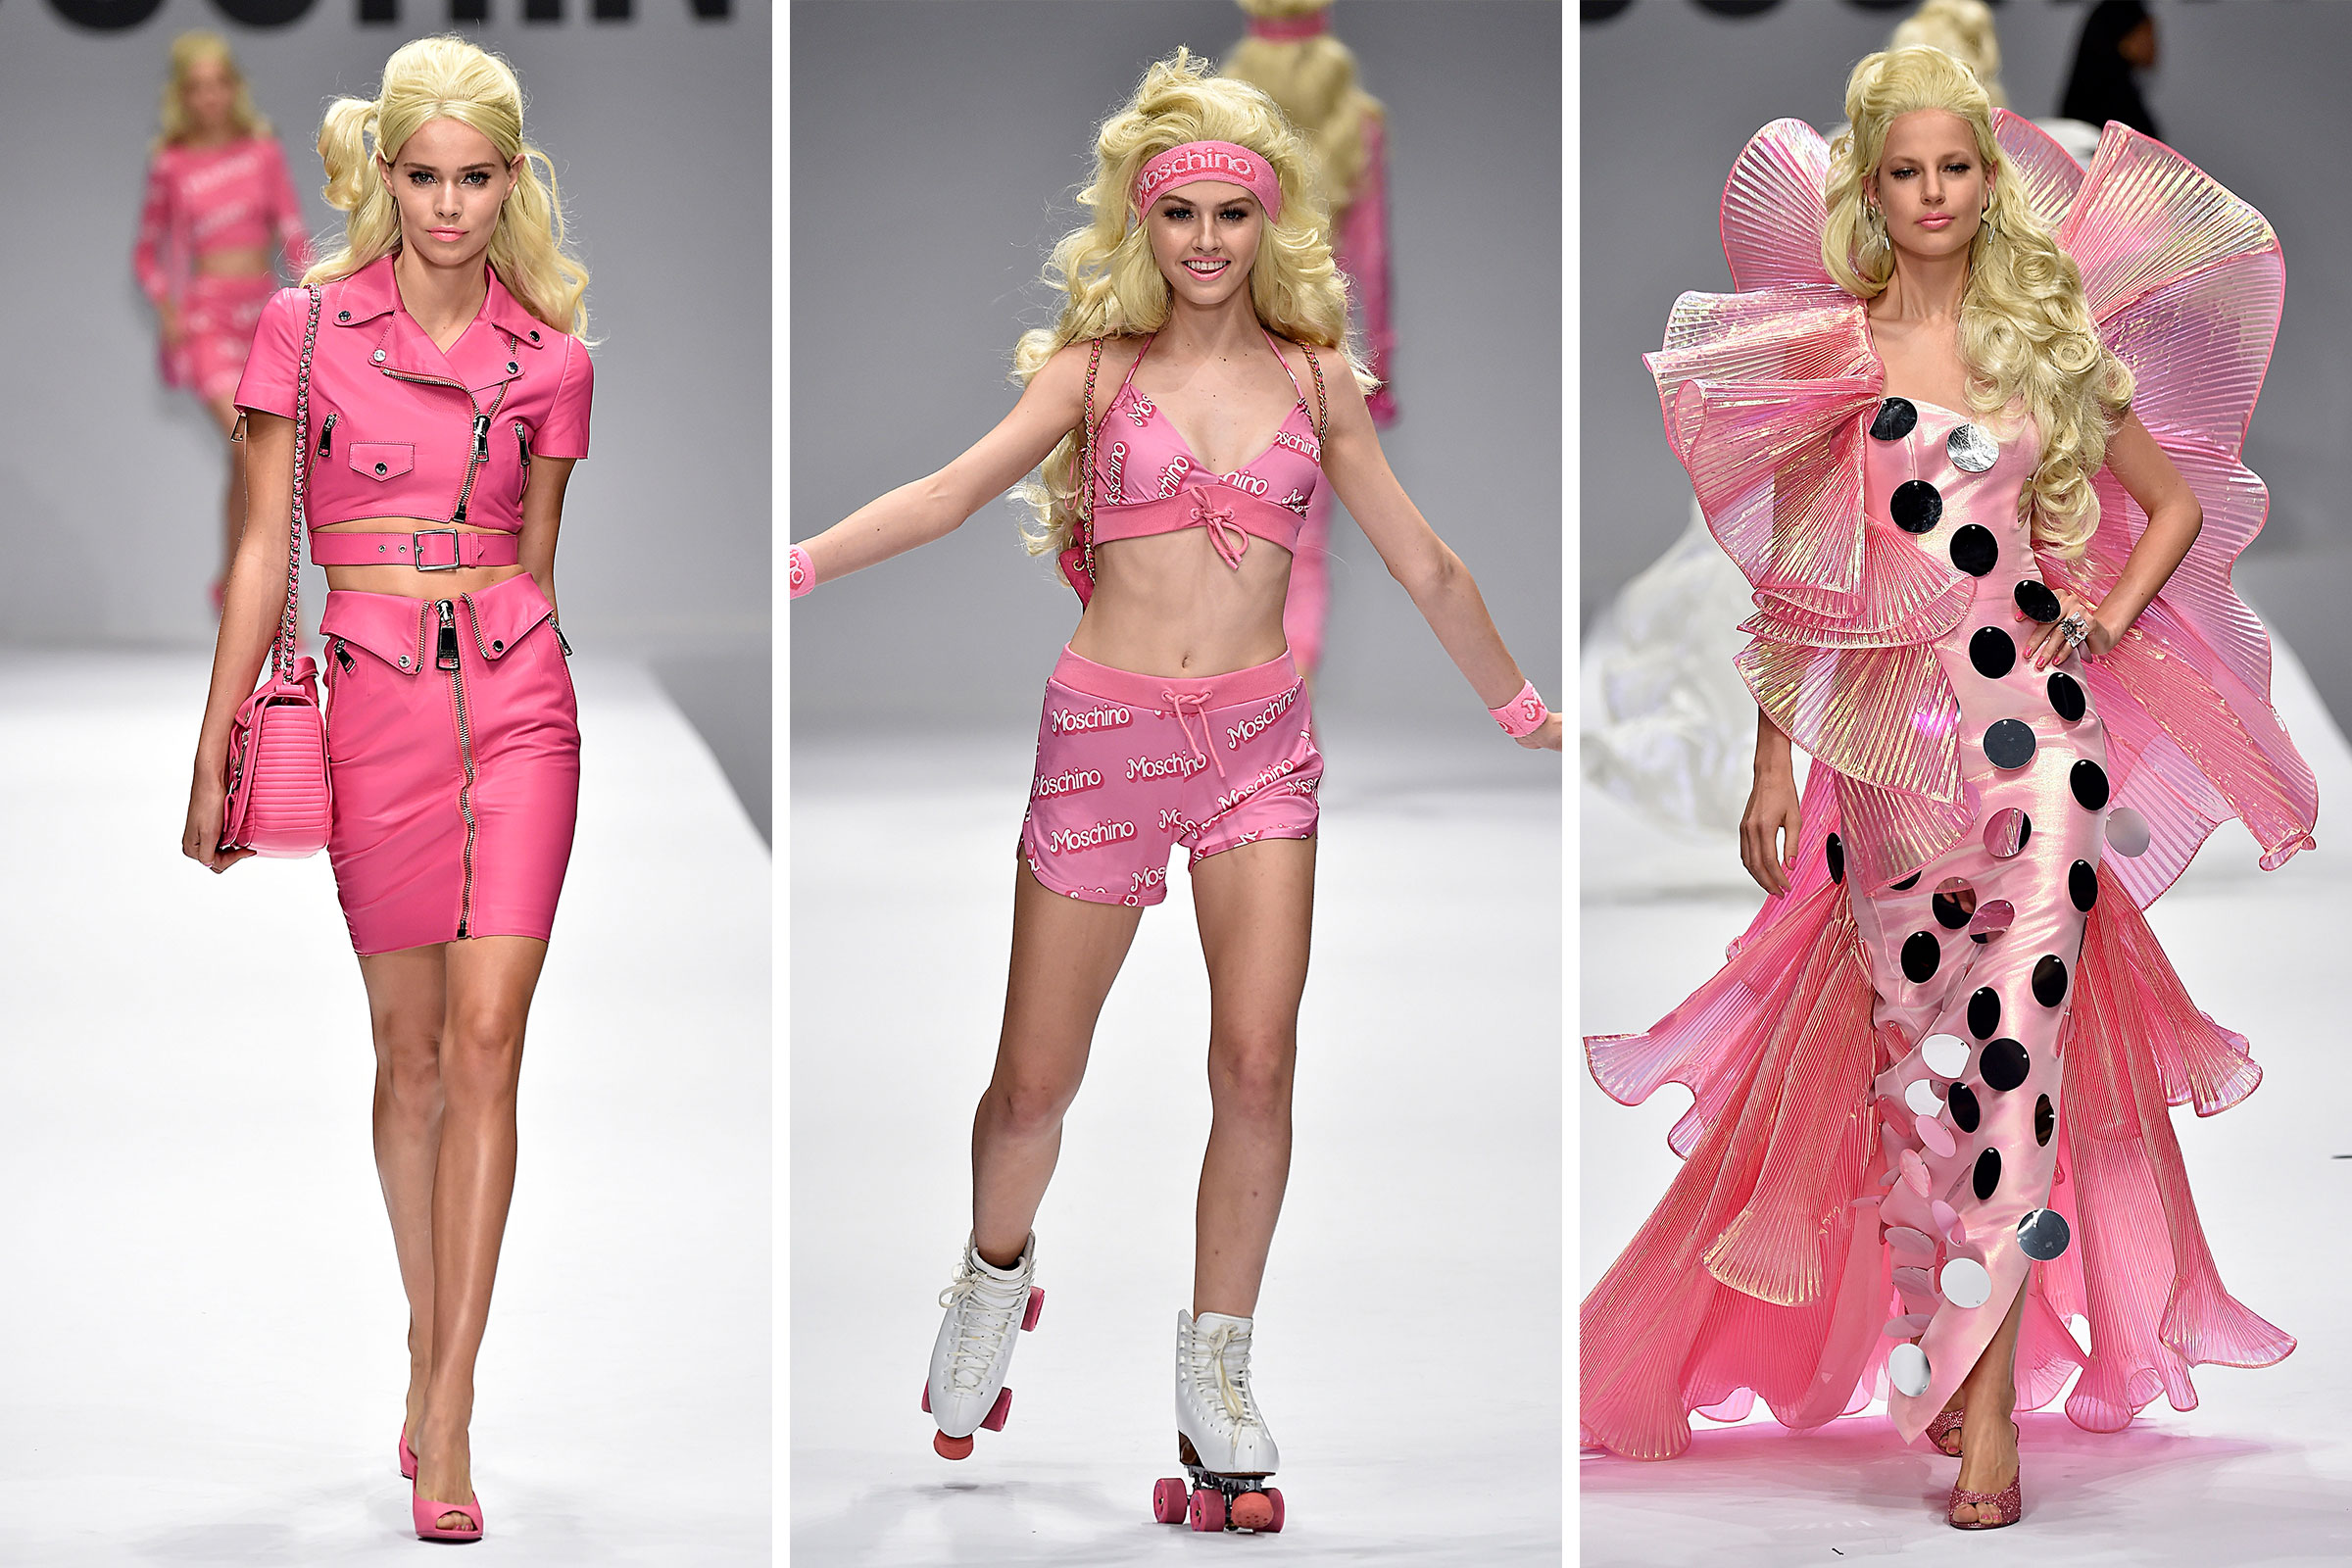 Models walk the runway during the Moschino Ready to Wear show as part of Milan Fashion Week Womenswear Spring/Summer 2015